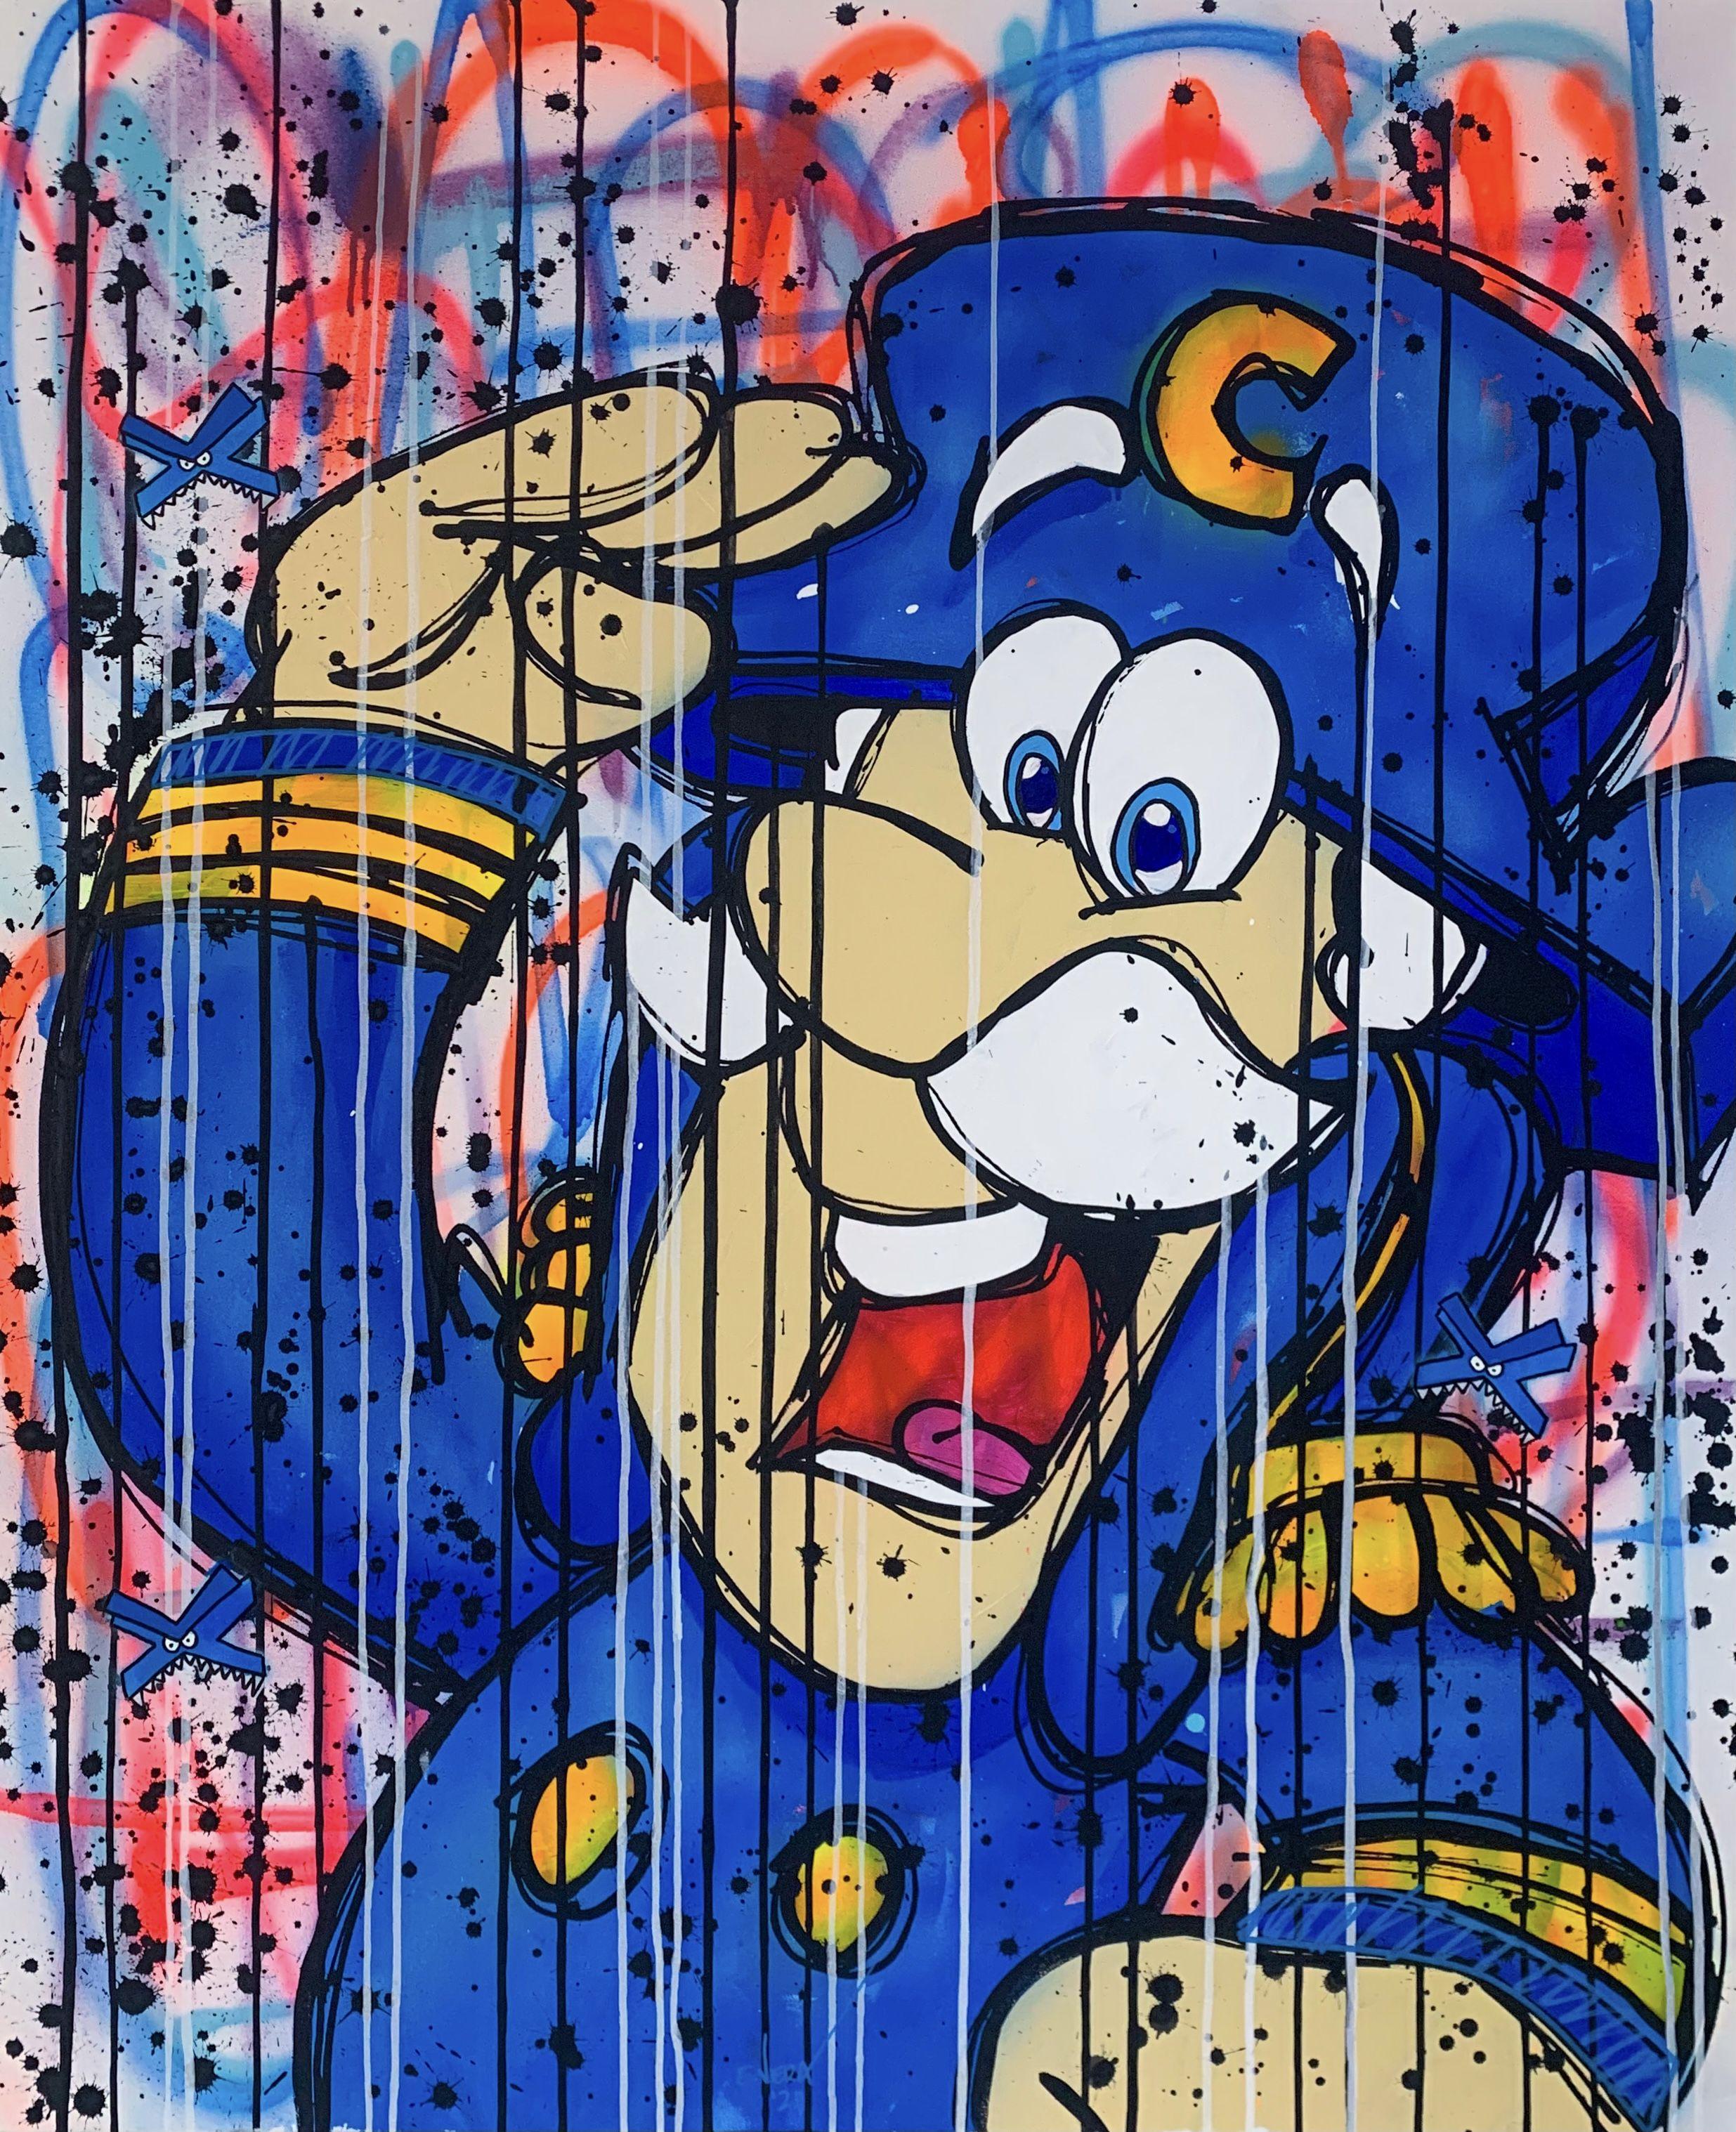 Cap'n Crunch inspired, great colors, acrylic and spray on canvas, great artwork, exhibitions in the best Art Galleries in France, USA and Mexico. :: Painting :: Pop-Art :: This piece comes with an official certificate of authenticity signed by the